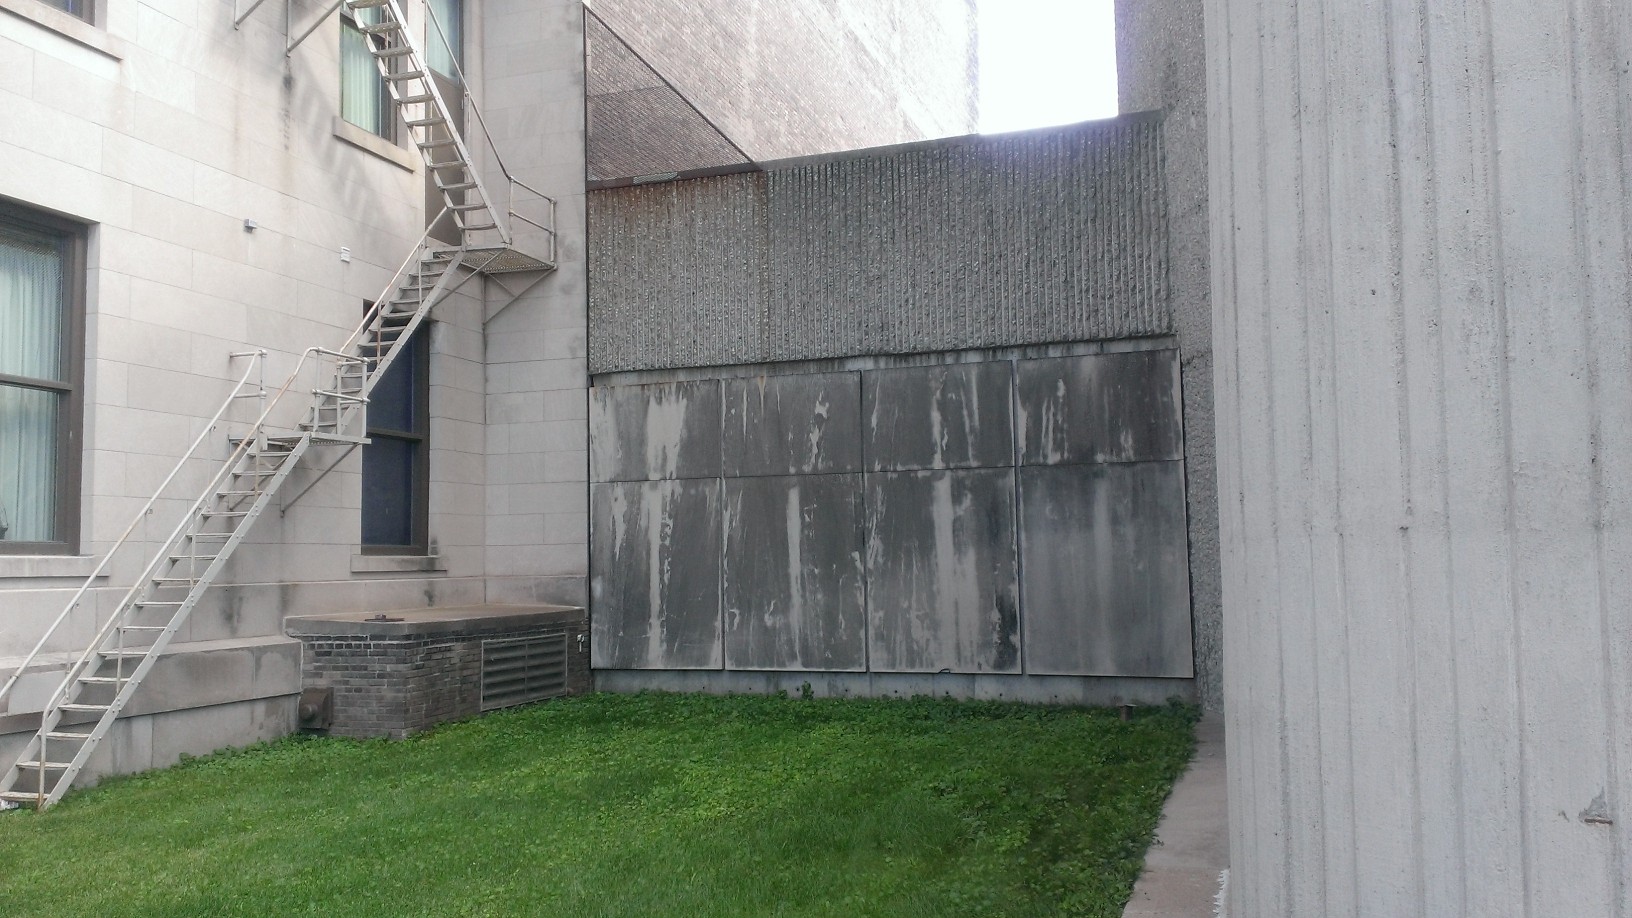  The Scottish Rite west garage wall before work was done. 